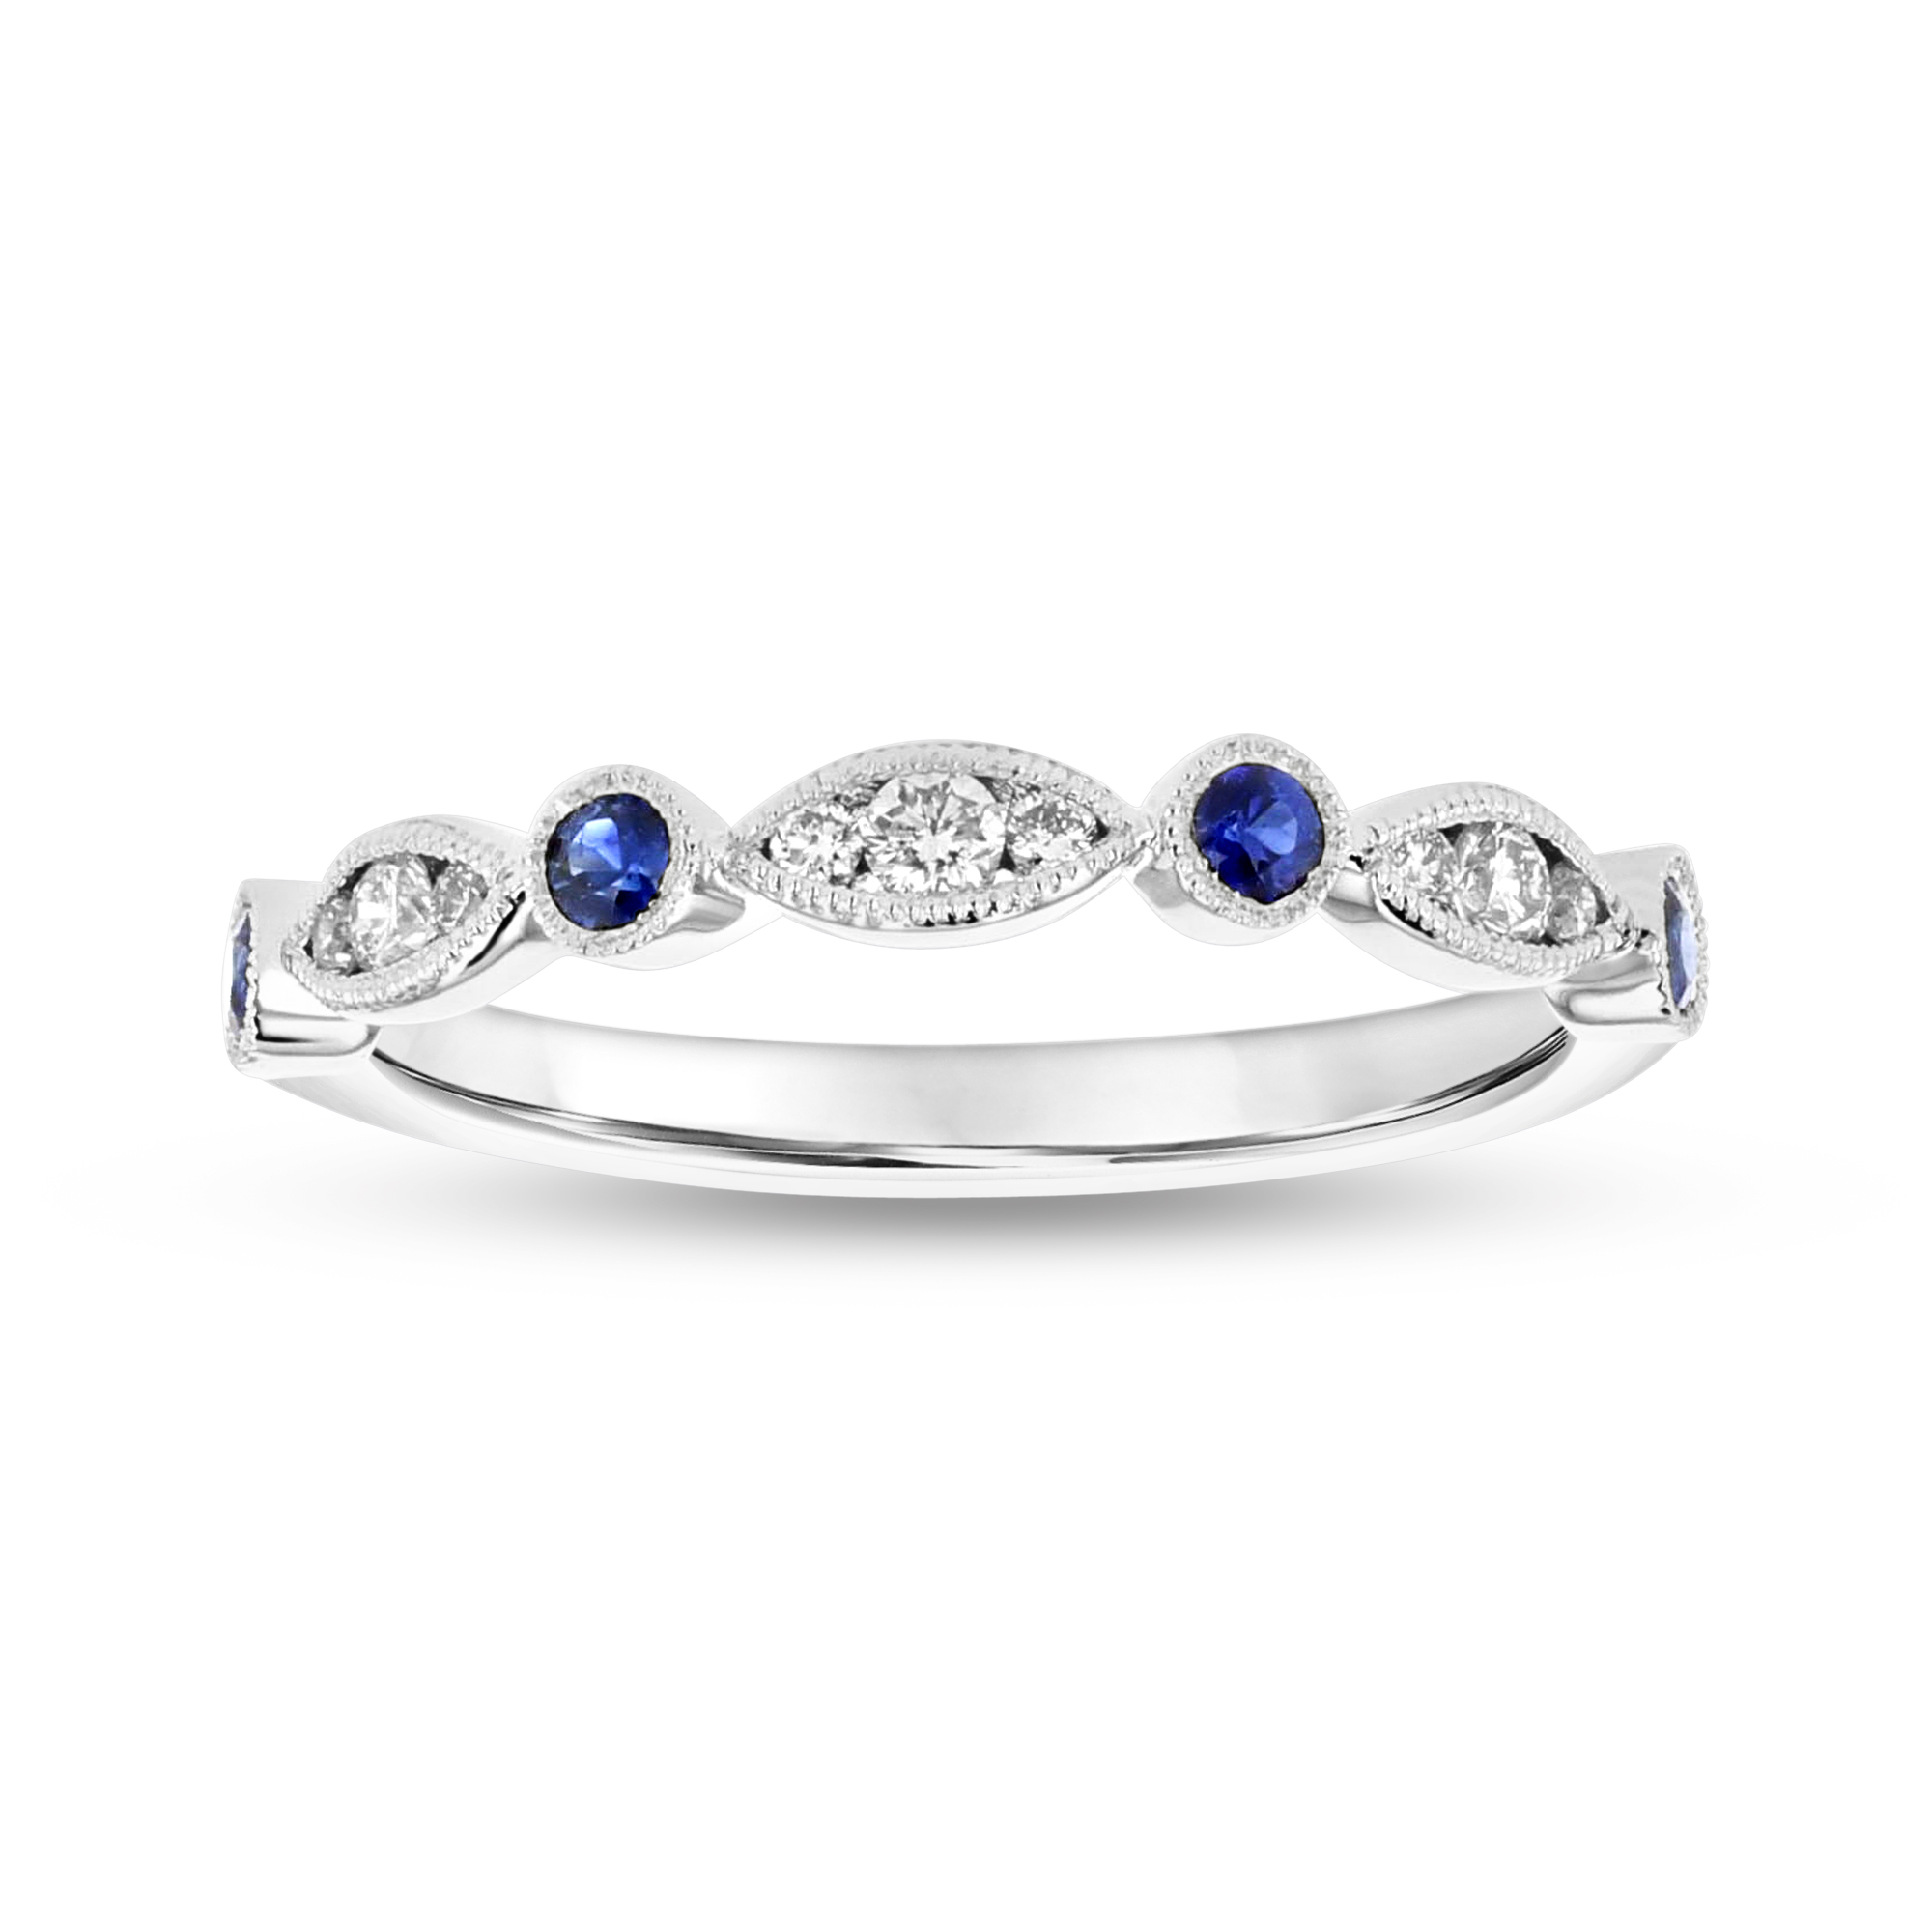 0.16ctw Diamond and Sapphire Band in 18k White Gold